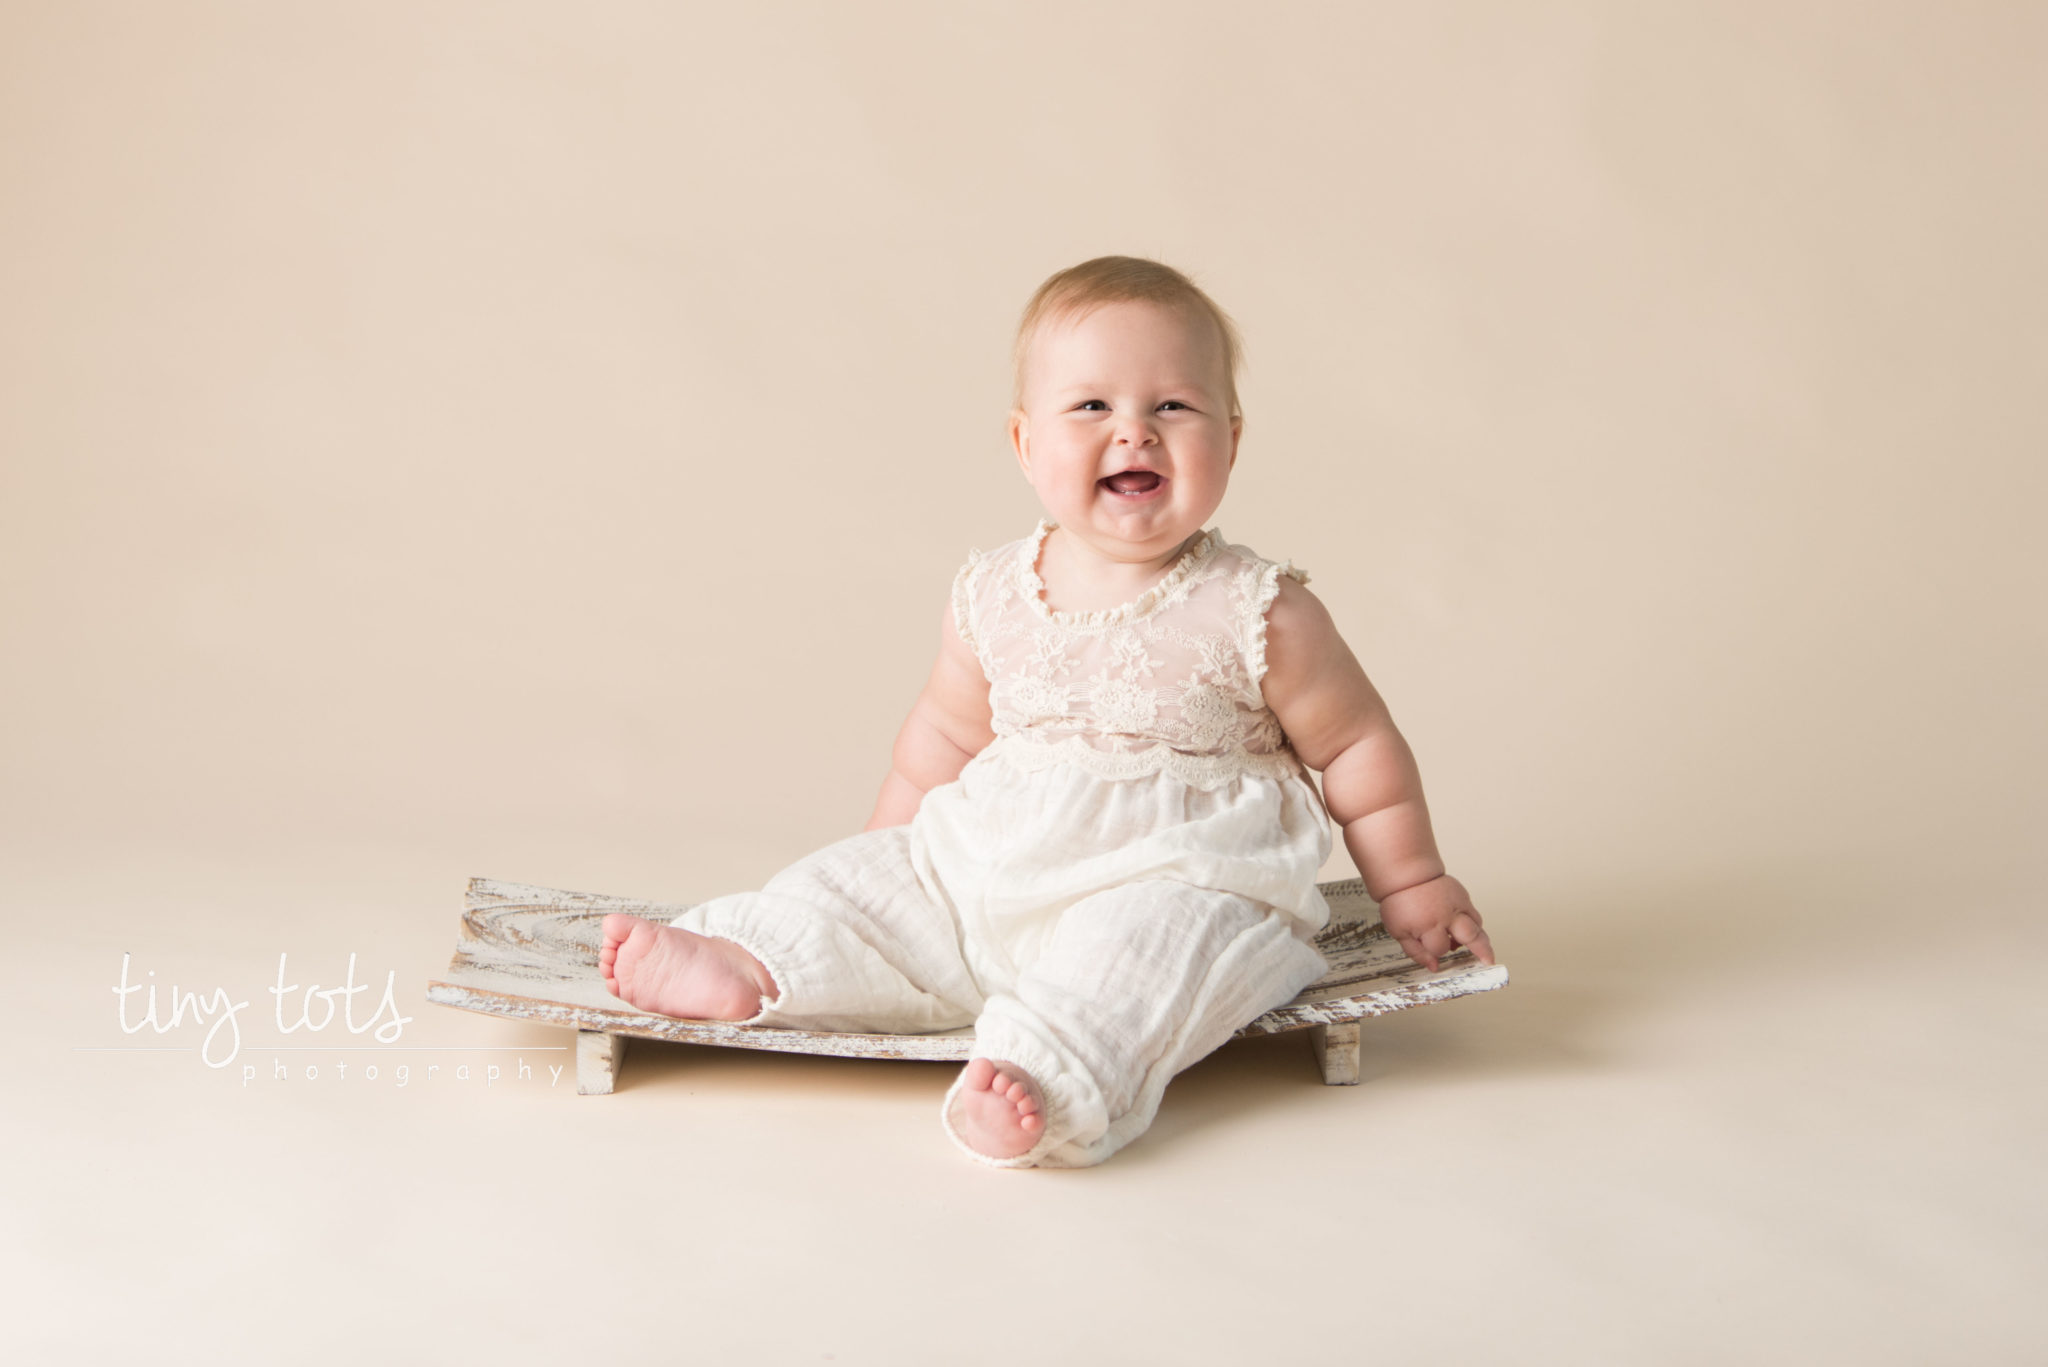 3-Month-Old Photo Ideas to Hold Precious Moments